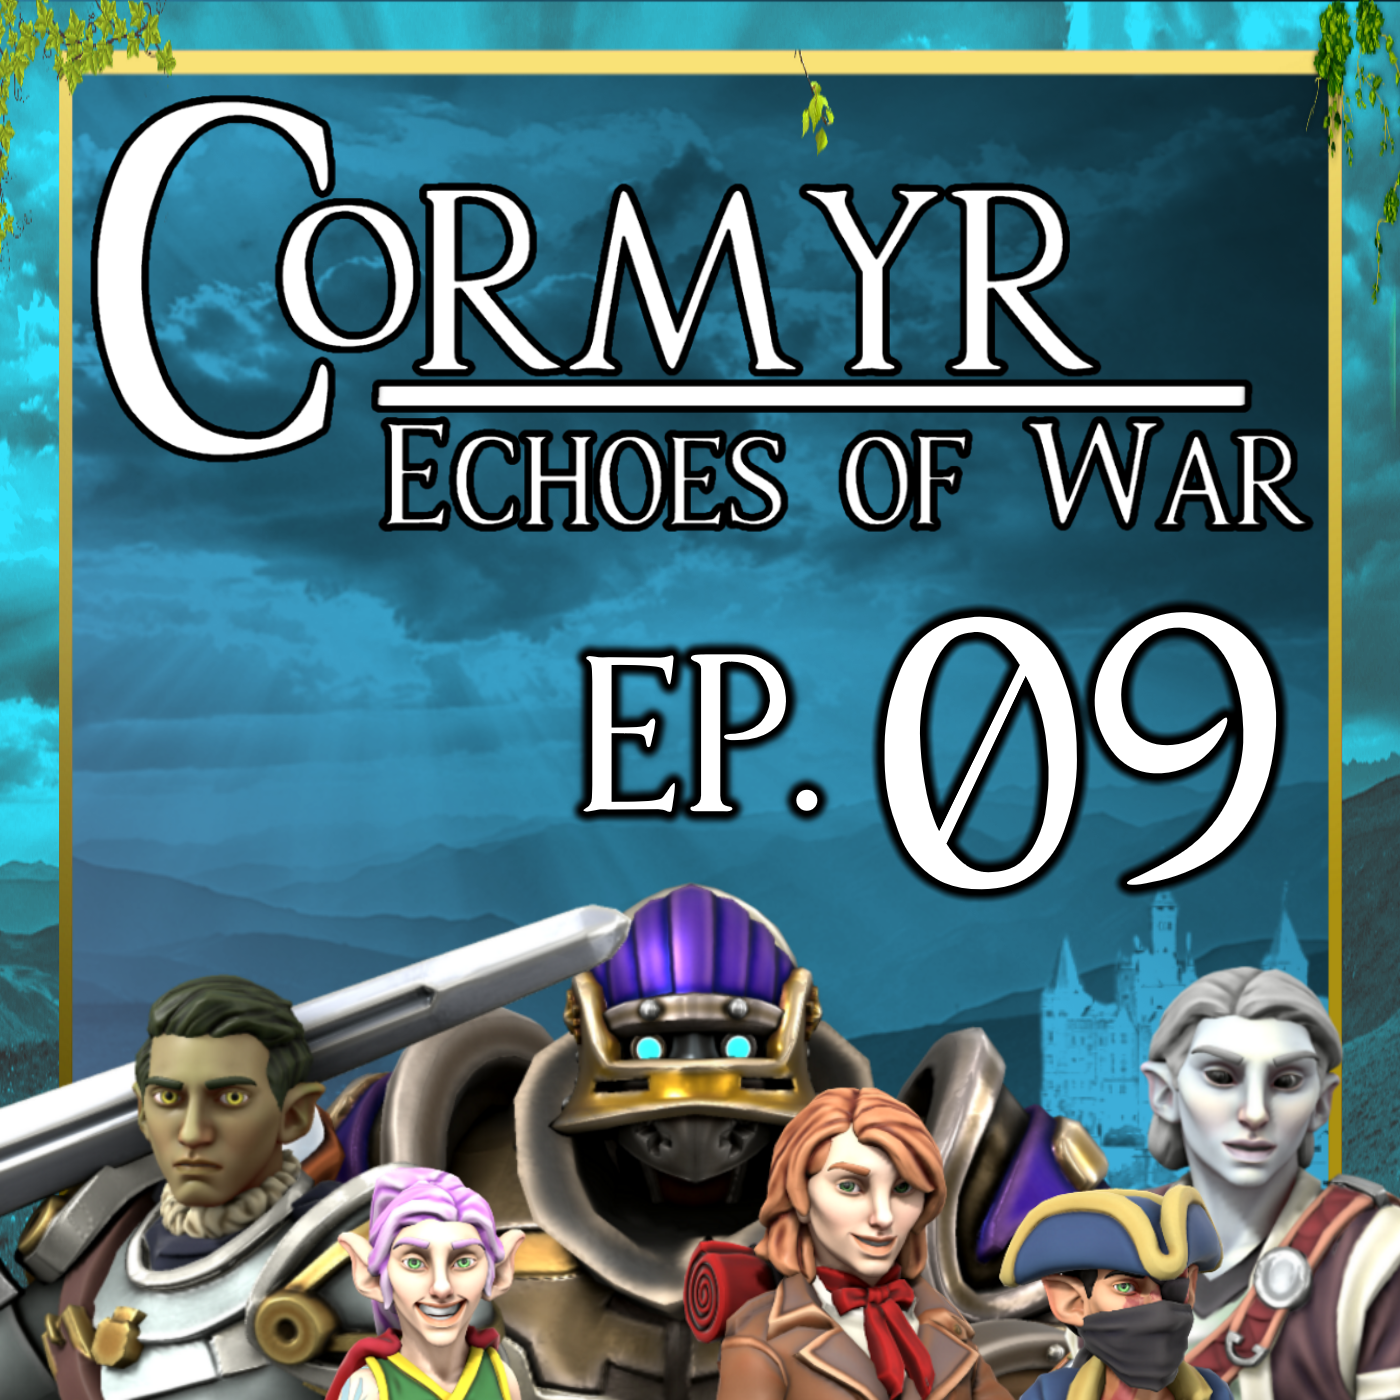 Cormyr: Echoes of War - Ep. 9 - The Monsters We Leave Behind